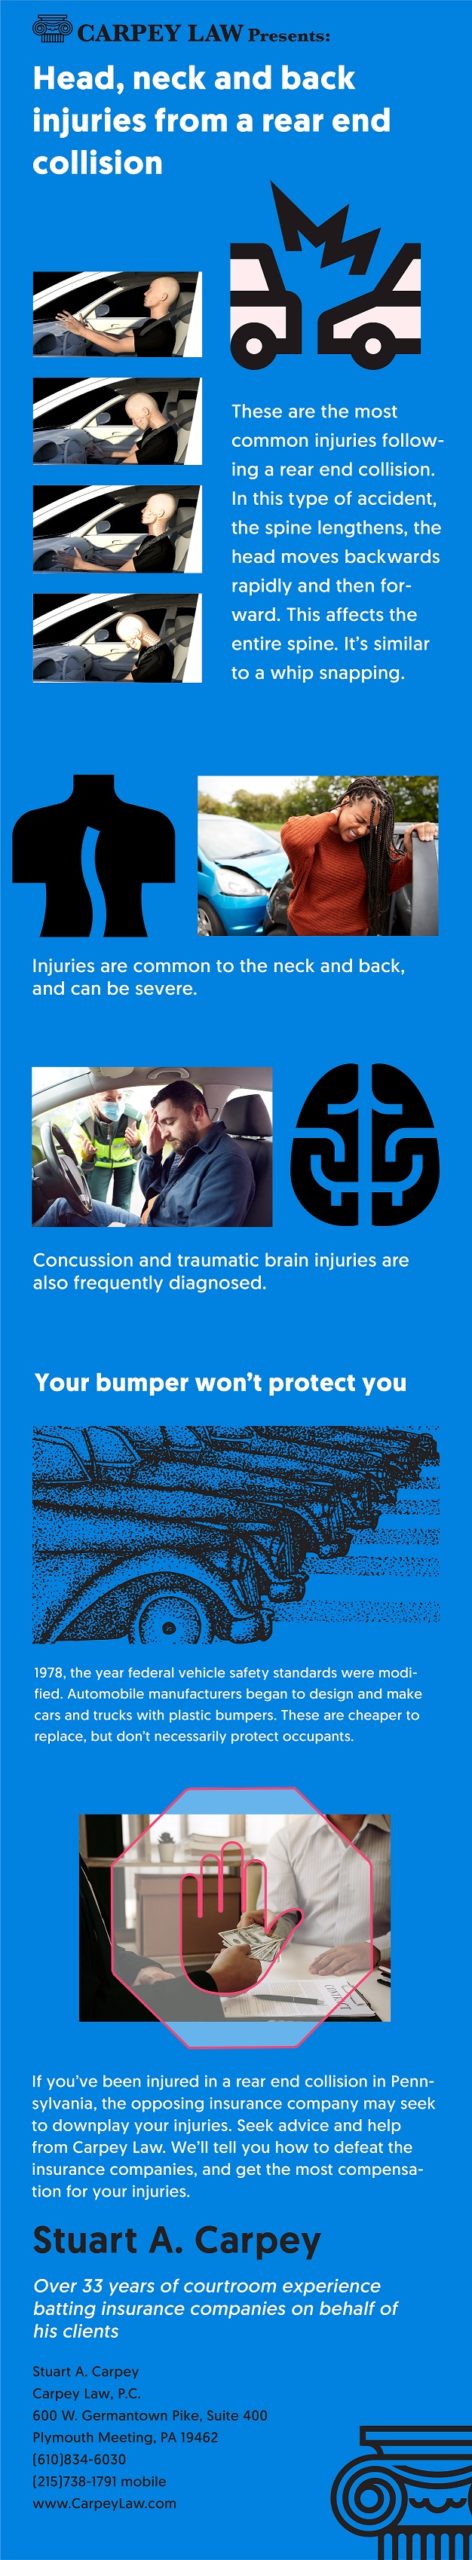 Head, neck and back injuries from a rear end collision